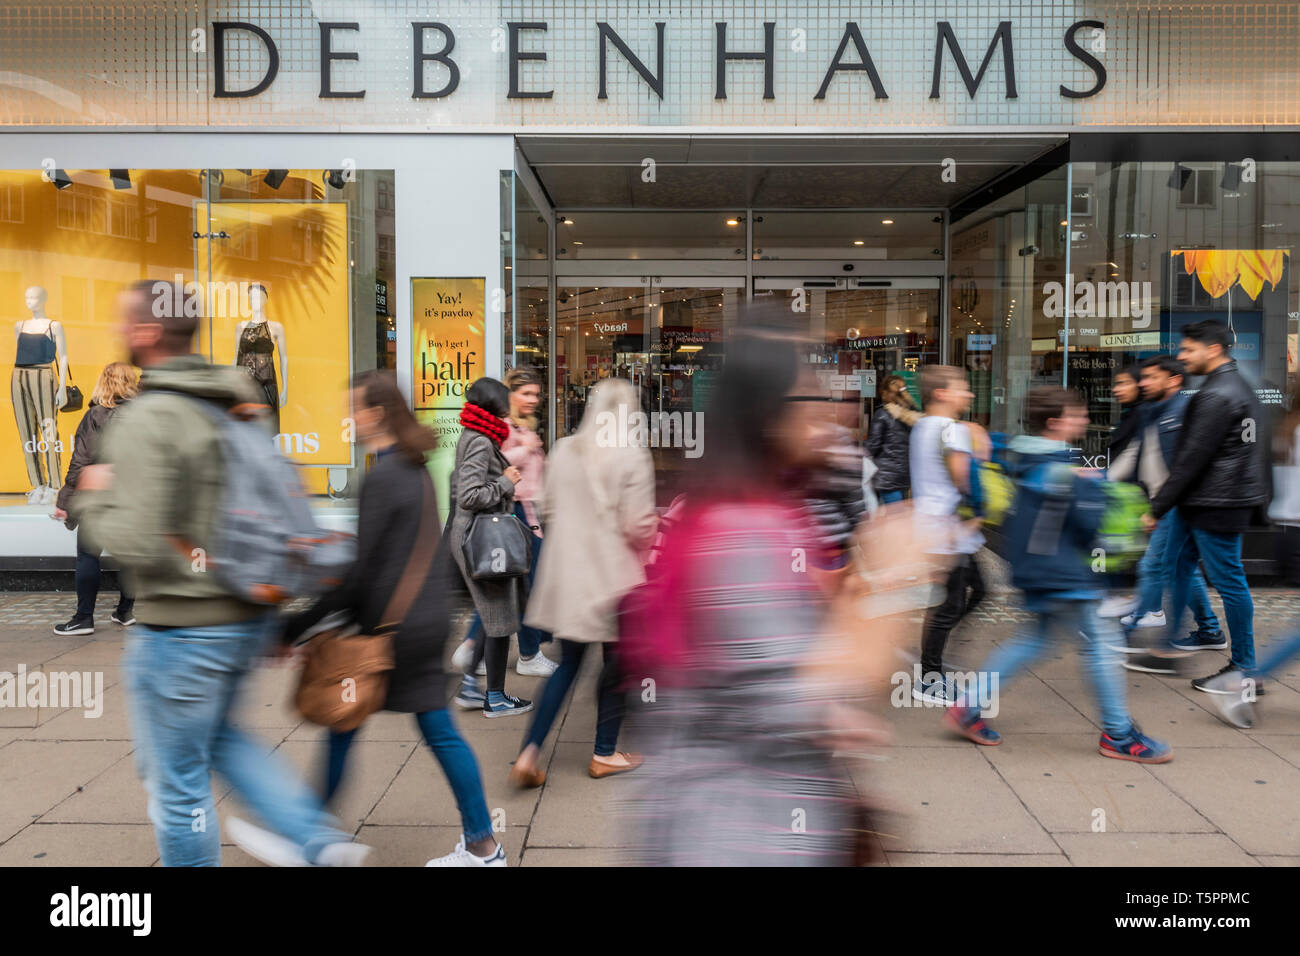 London, UK. 26th Apr 2019. Consumers pass by Debenhams Oxford Street. Debenhams names 22 store it will close by 2020. It seems its flagship store on Oxford Street is not one of them. Credit: Guy Bell/Alamy Live News Stock Photo